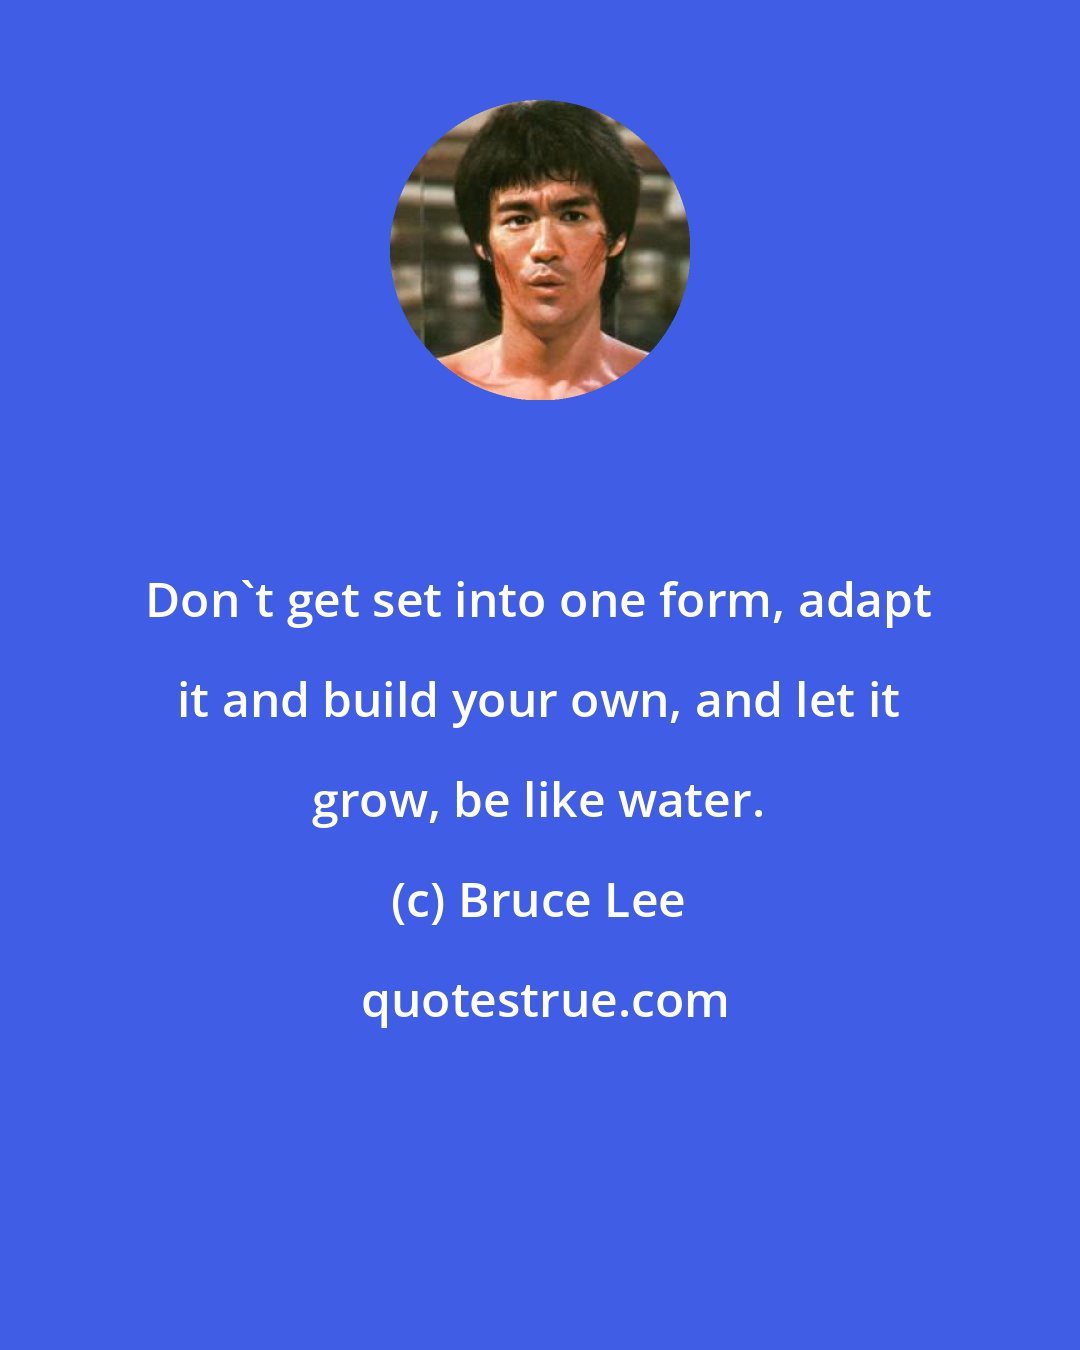 Bruce Lee: Don't get set into one form, adapt it and build your own, and let it grow, be like water.